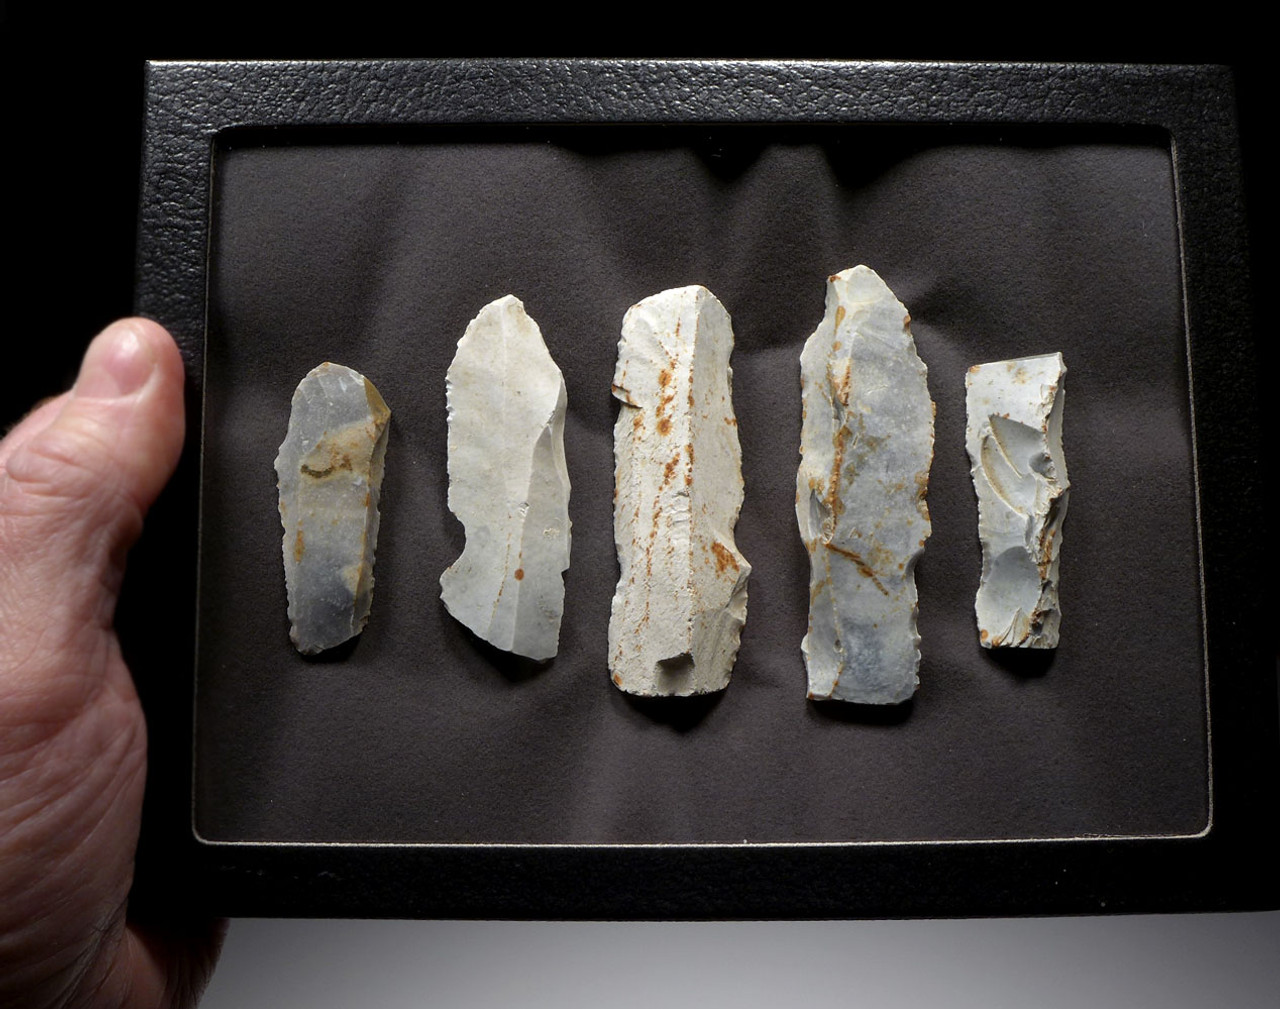 FIVE NEOLITHIC FLINT TOOL BLADE KNIVES FROM THE FAMOUS SPIENNES SITE OF BELGIUM  *N205